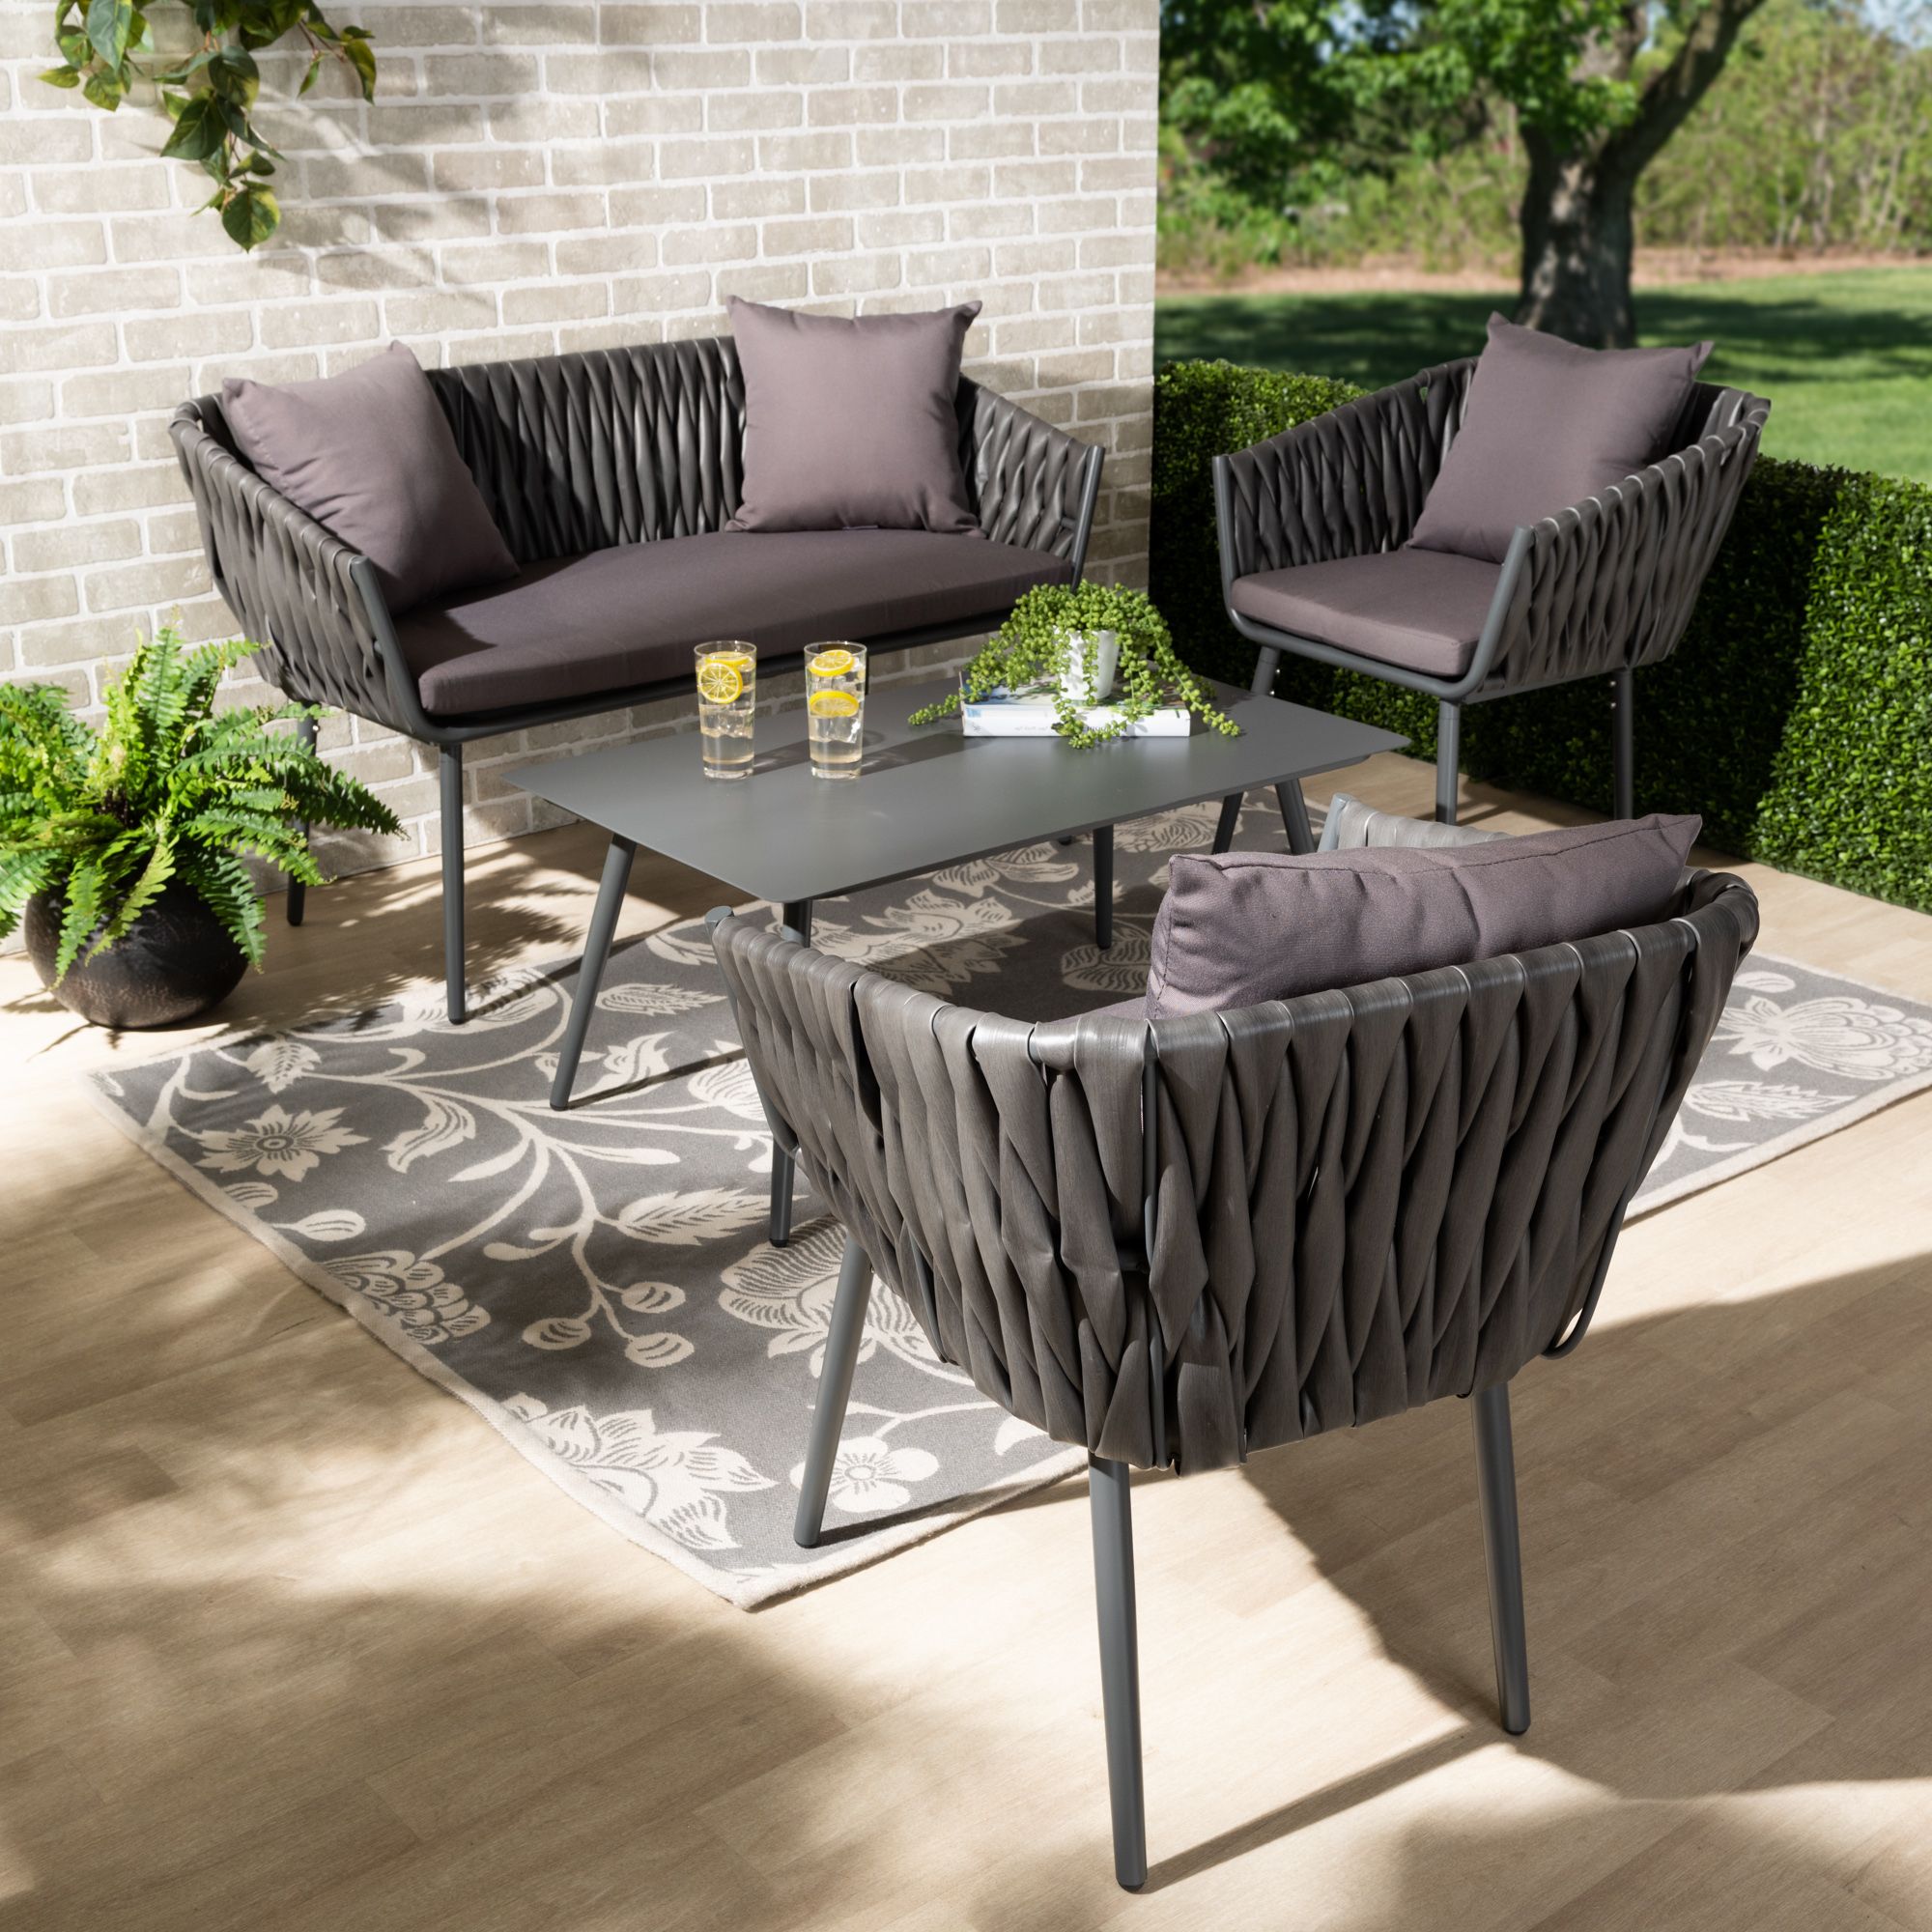 Modern Outdoor Patio Coffee Tables Within Favorite Wow (View 10 of 10)